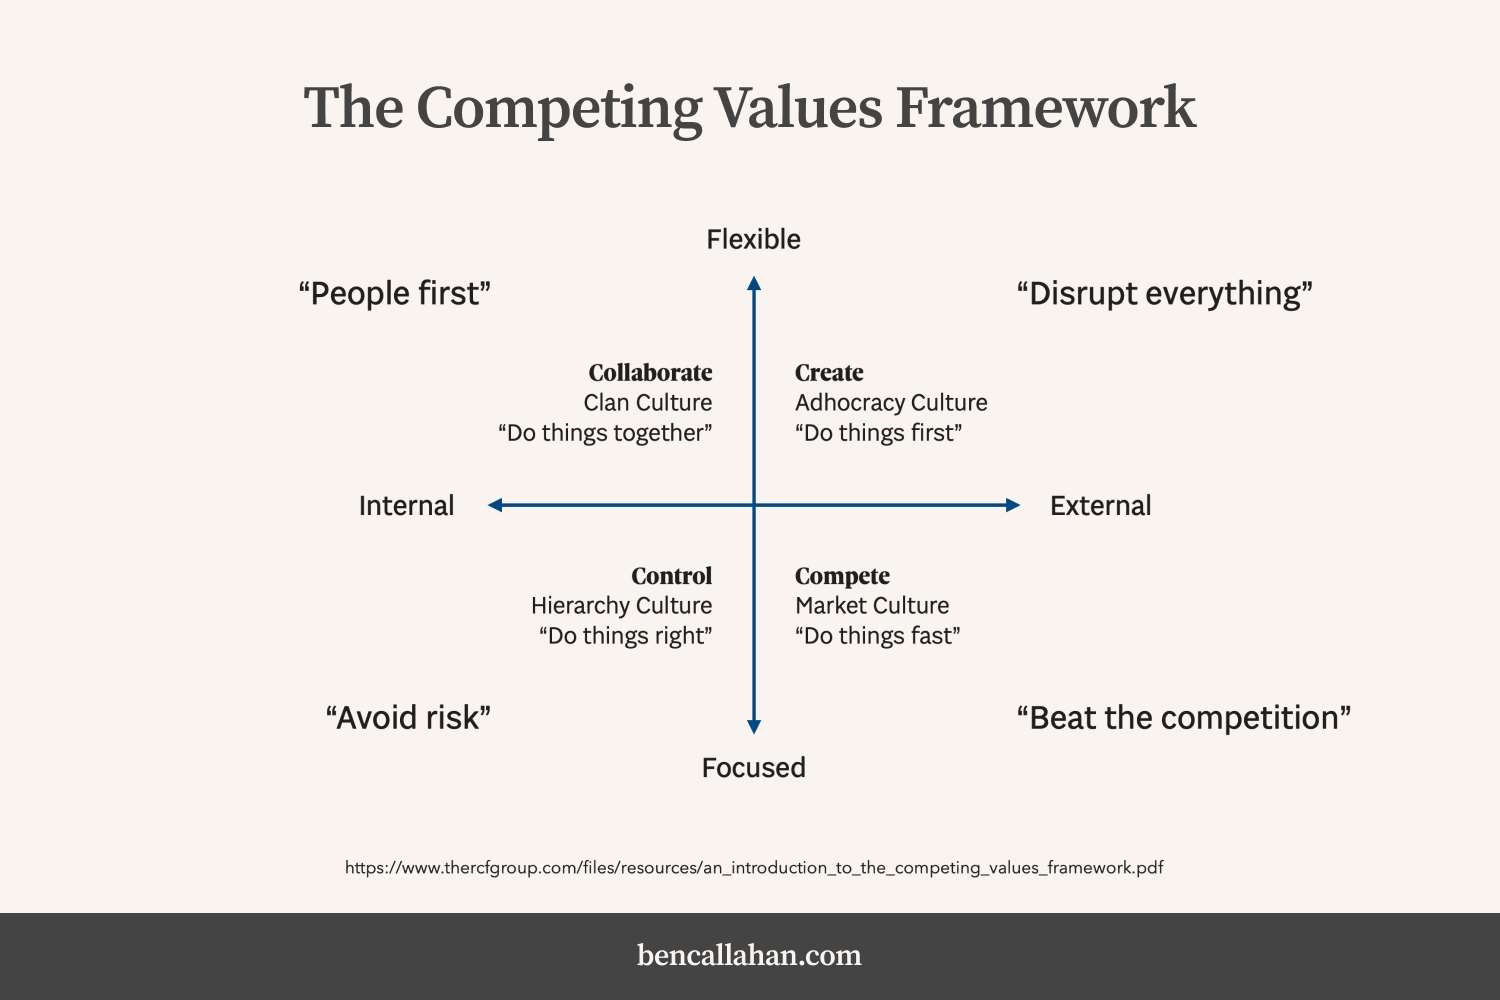 The Competing Values Framework offers a way to categorize organizational culture across four quadrants: Collaborate, Control, Create, and Compete.